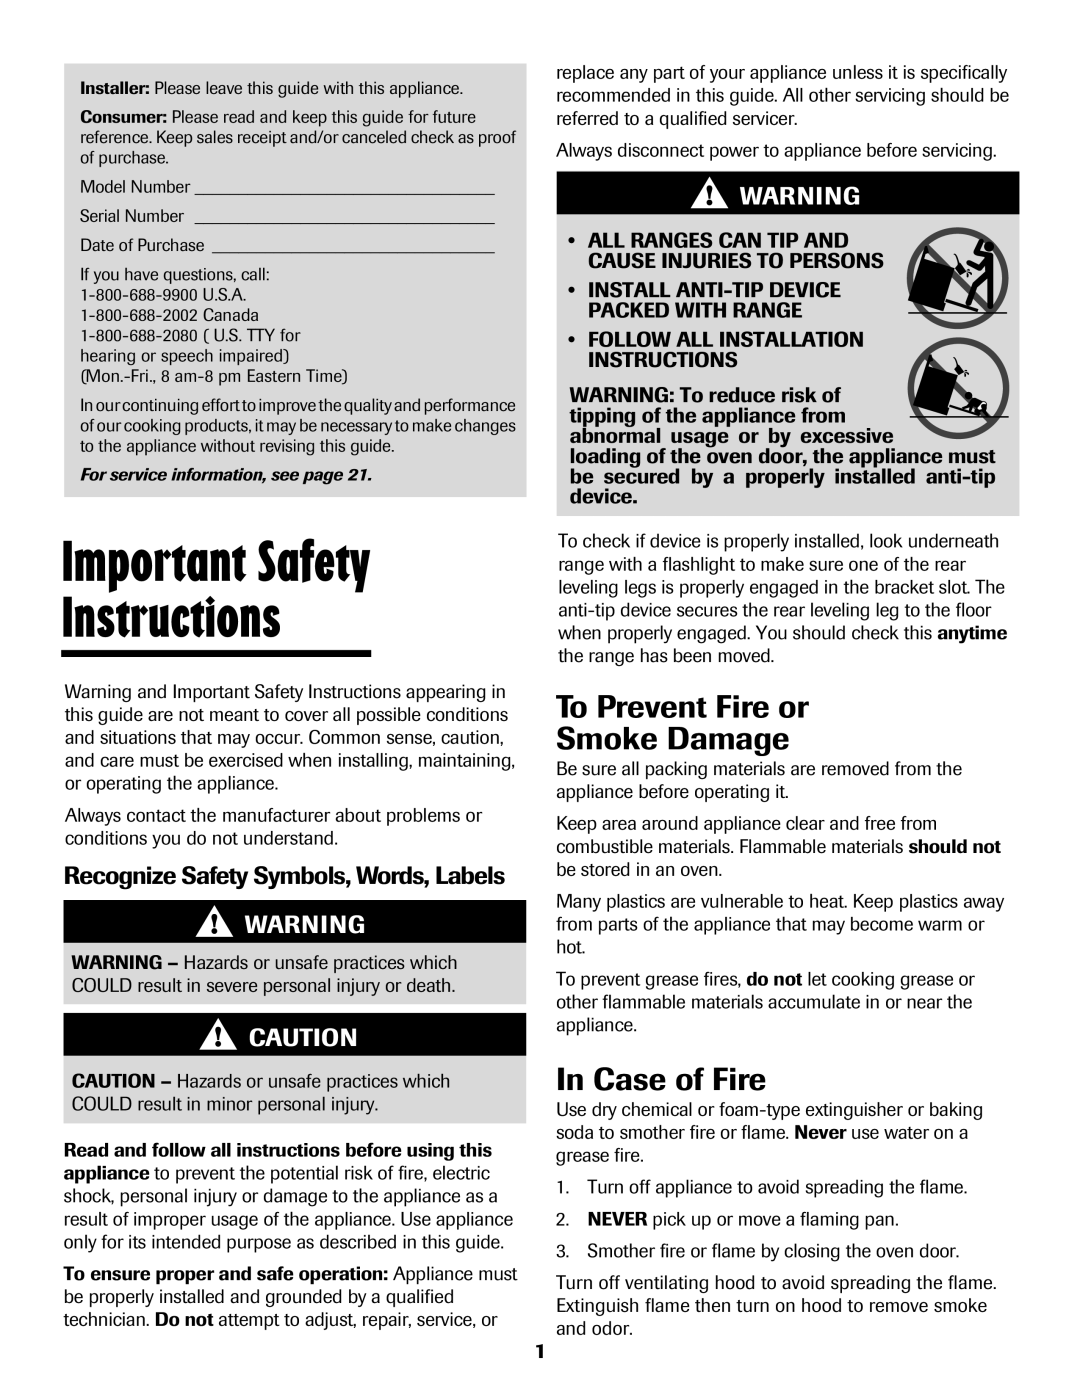 Maytag 500 important safety instructions Important Safety Instructions, To Prevent Fire or Smoke Damage, In Case of Fire 